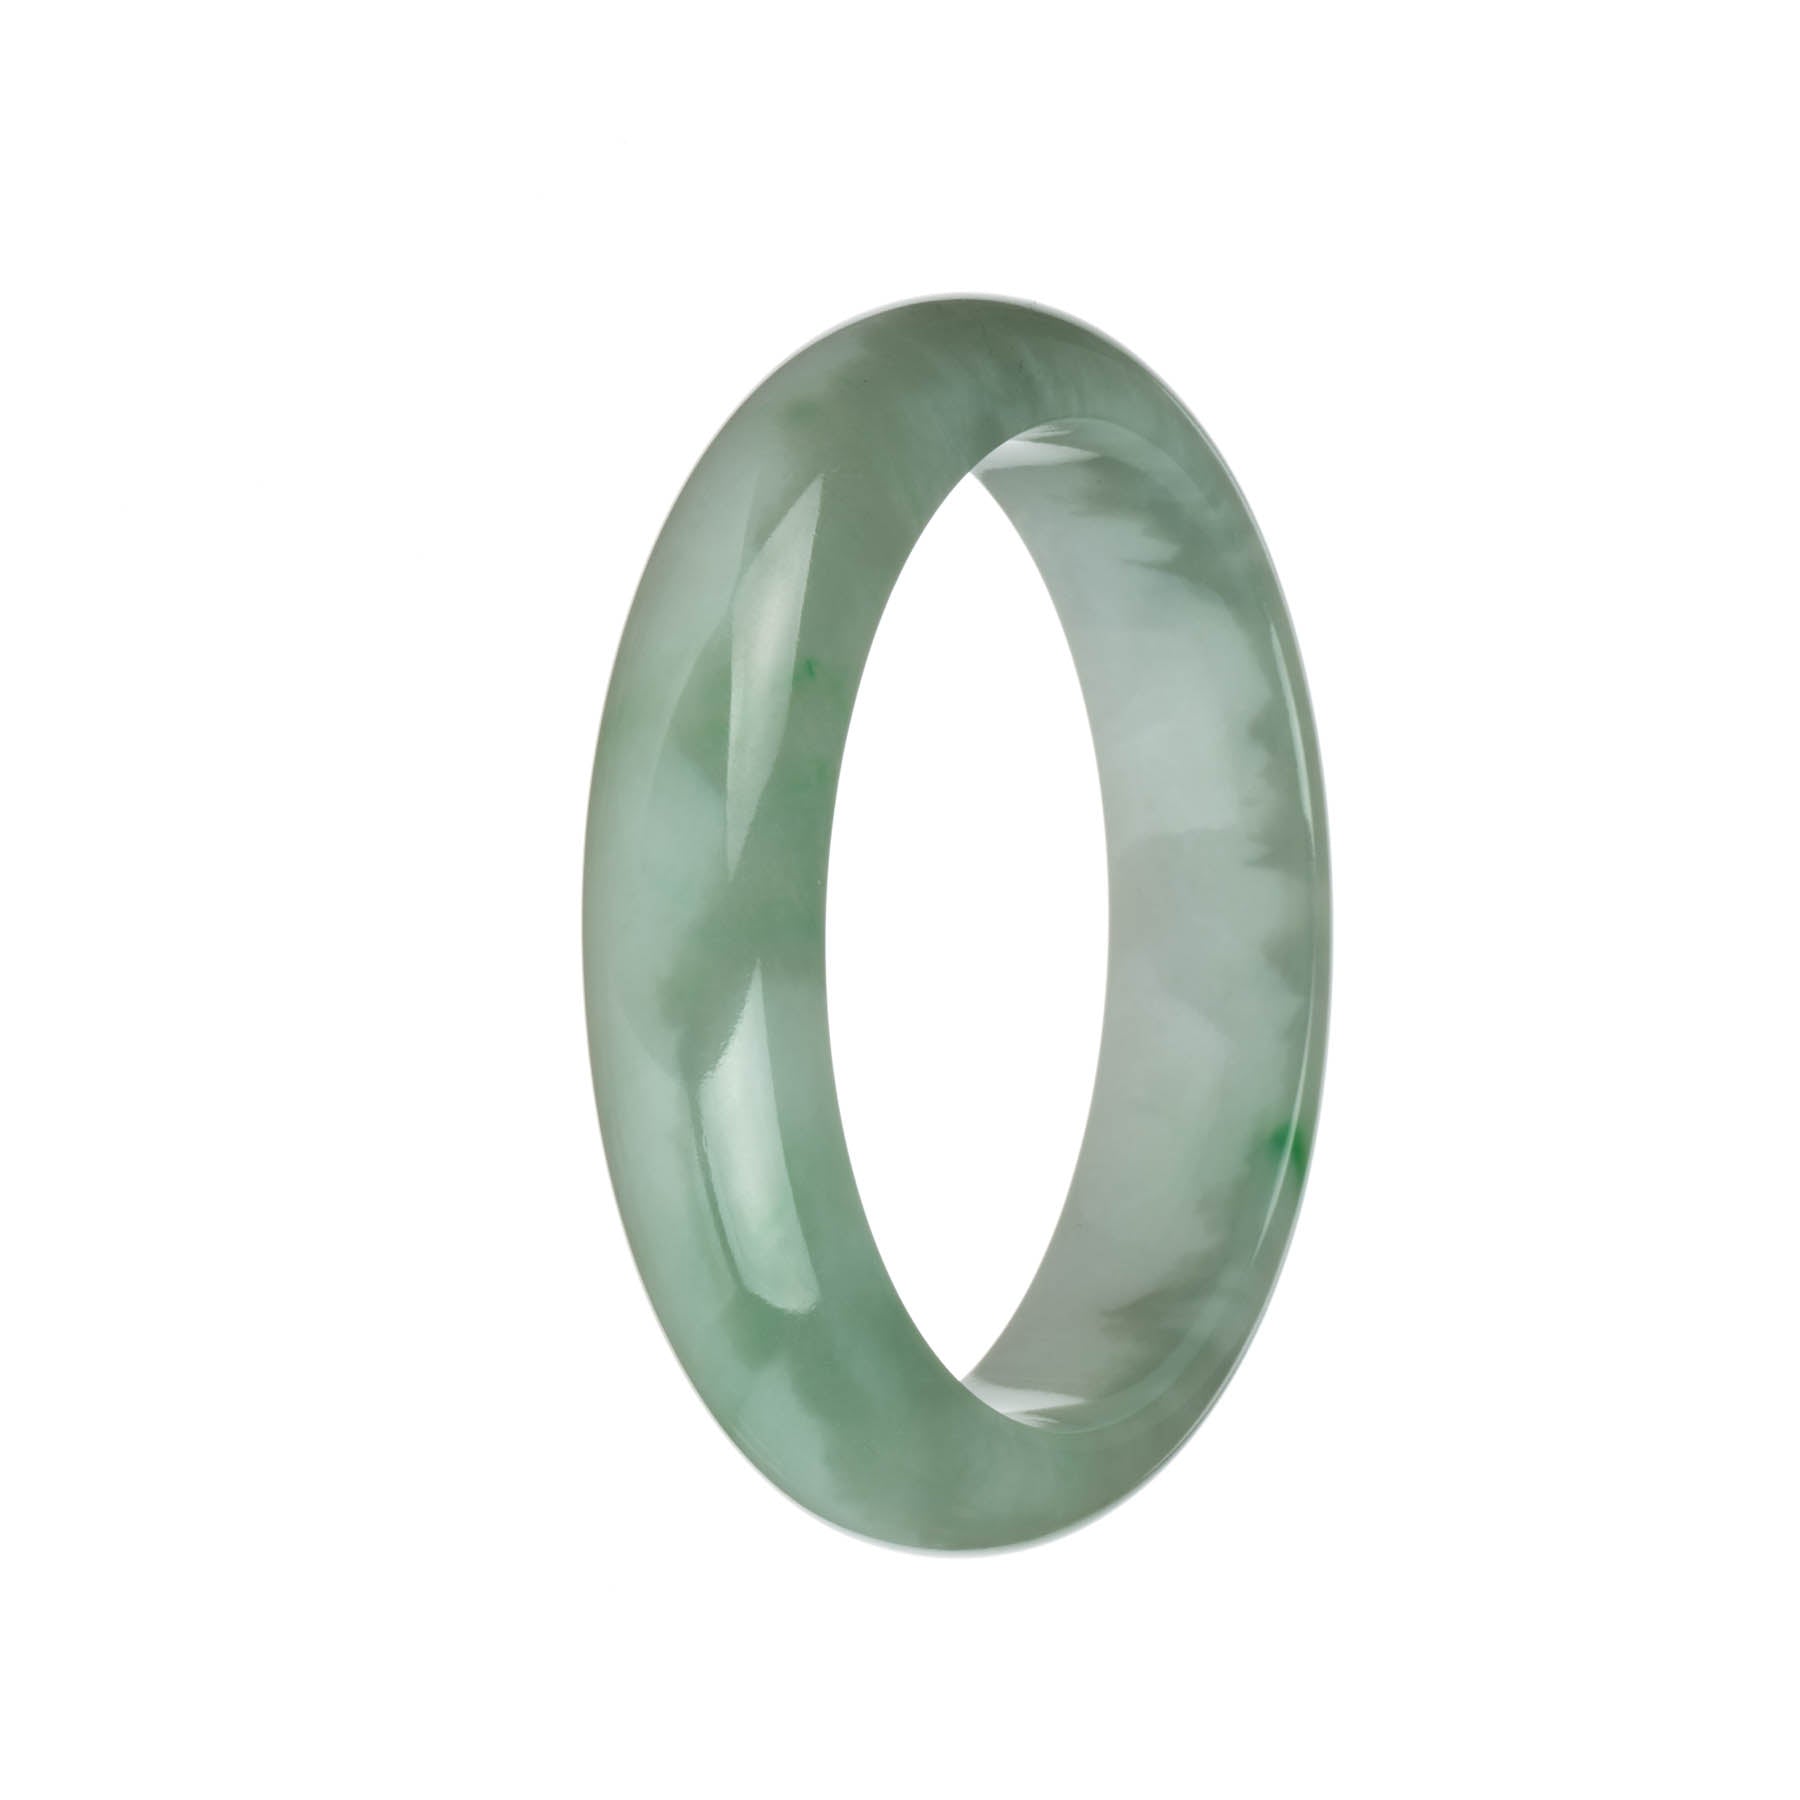 10.00mm Green/White Burma Jadeite Jade Bracelet - Watches & Fashion  Accessories for sale in Ayer Itam, Penang